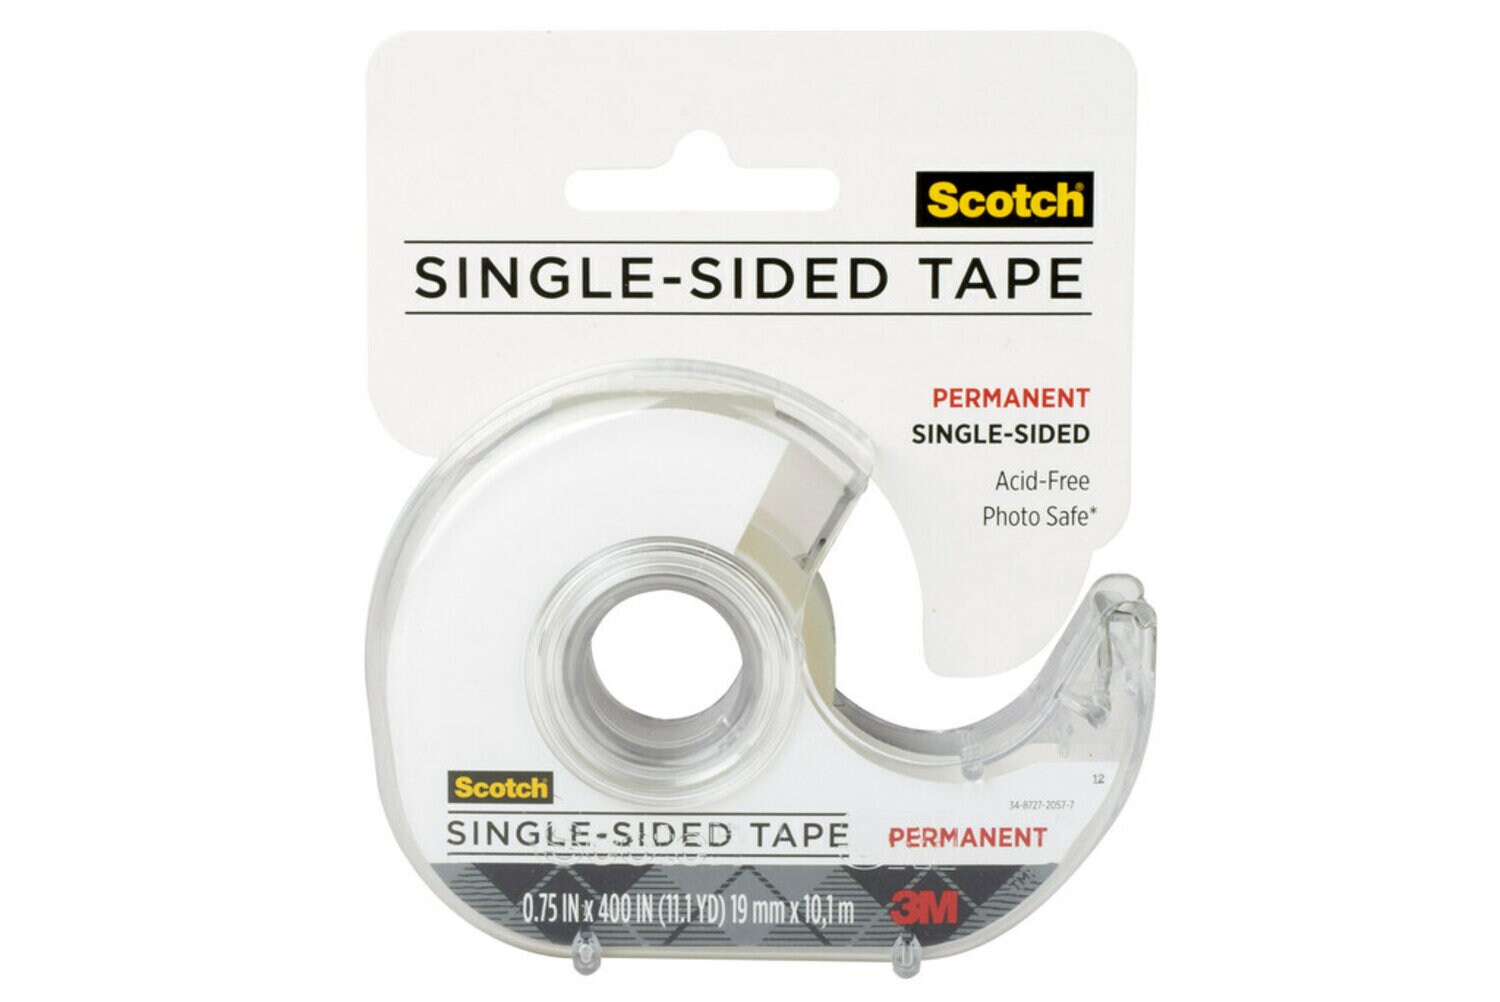 7010333586 - Scotch Tape Single Sided 001-CFT, 3/4 in x 400 in